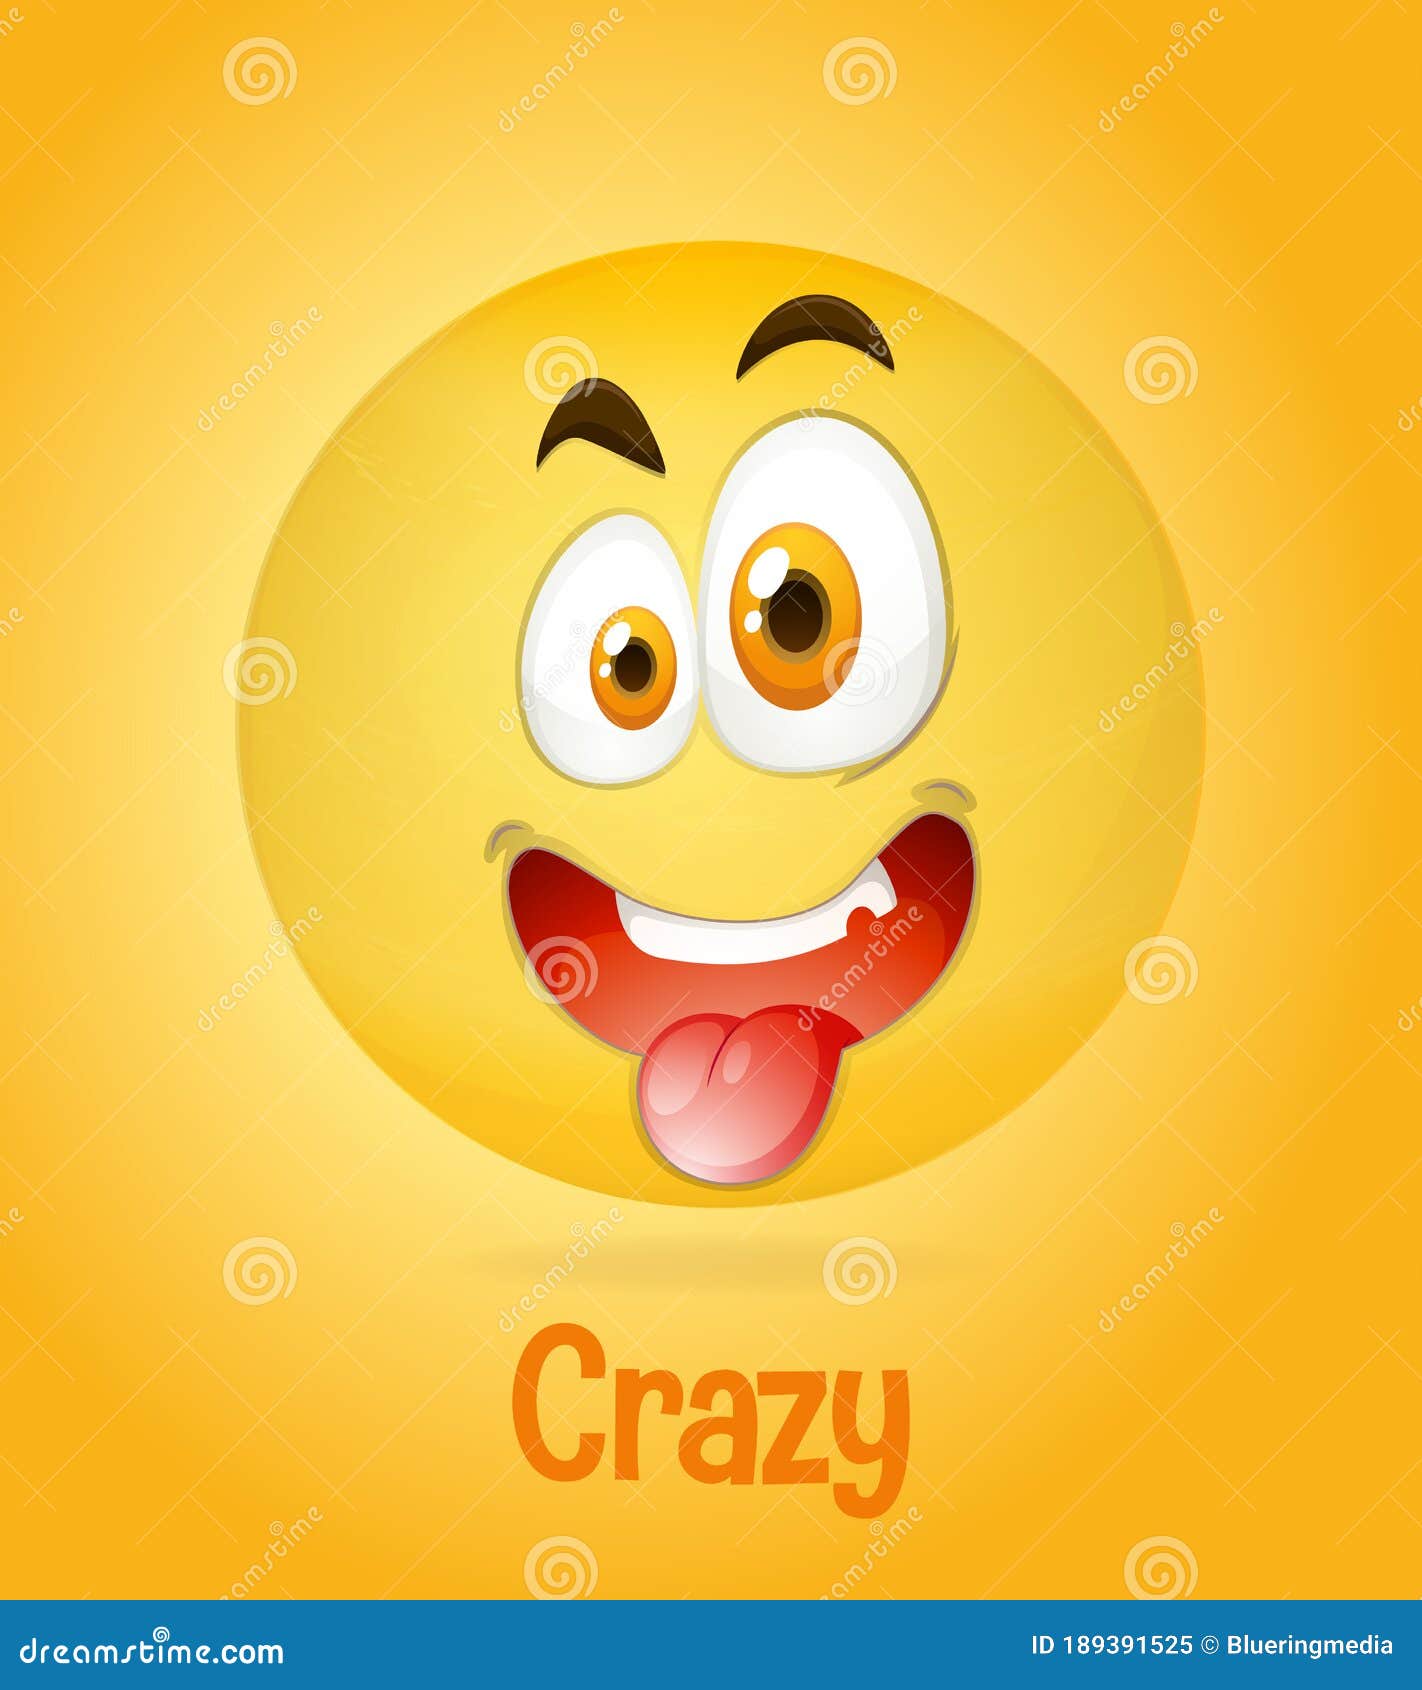 Crazy Faces Emoji With Its Description On Yellow Background Stock ...